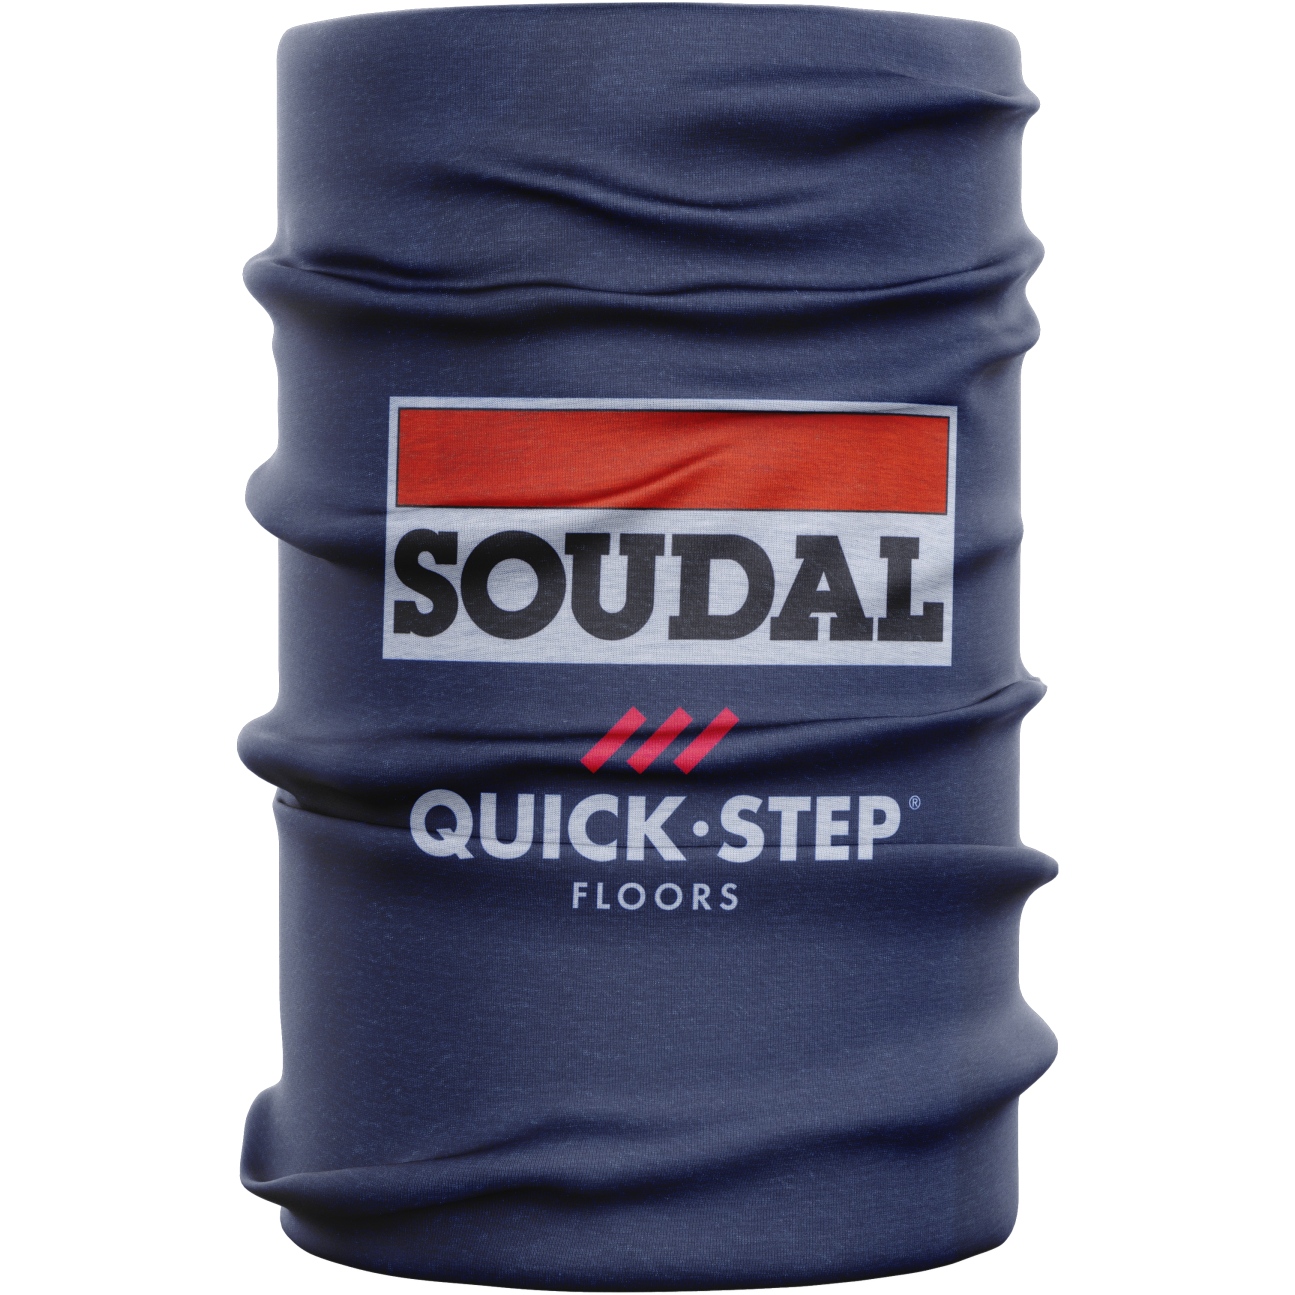 Picture of Castelli Light Head Thingy Team Soudal Quick-Step - belgian blue 424